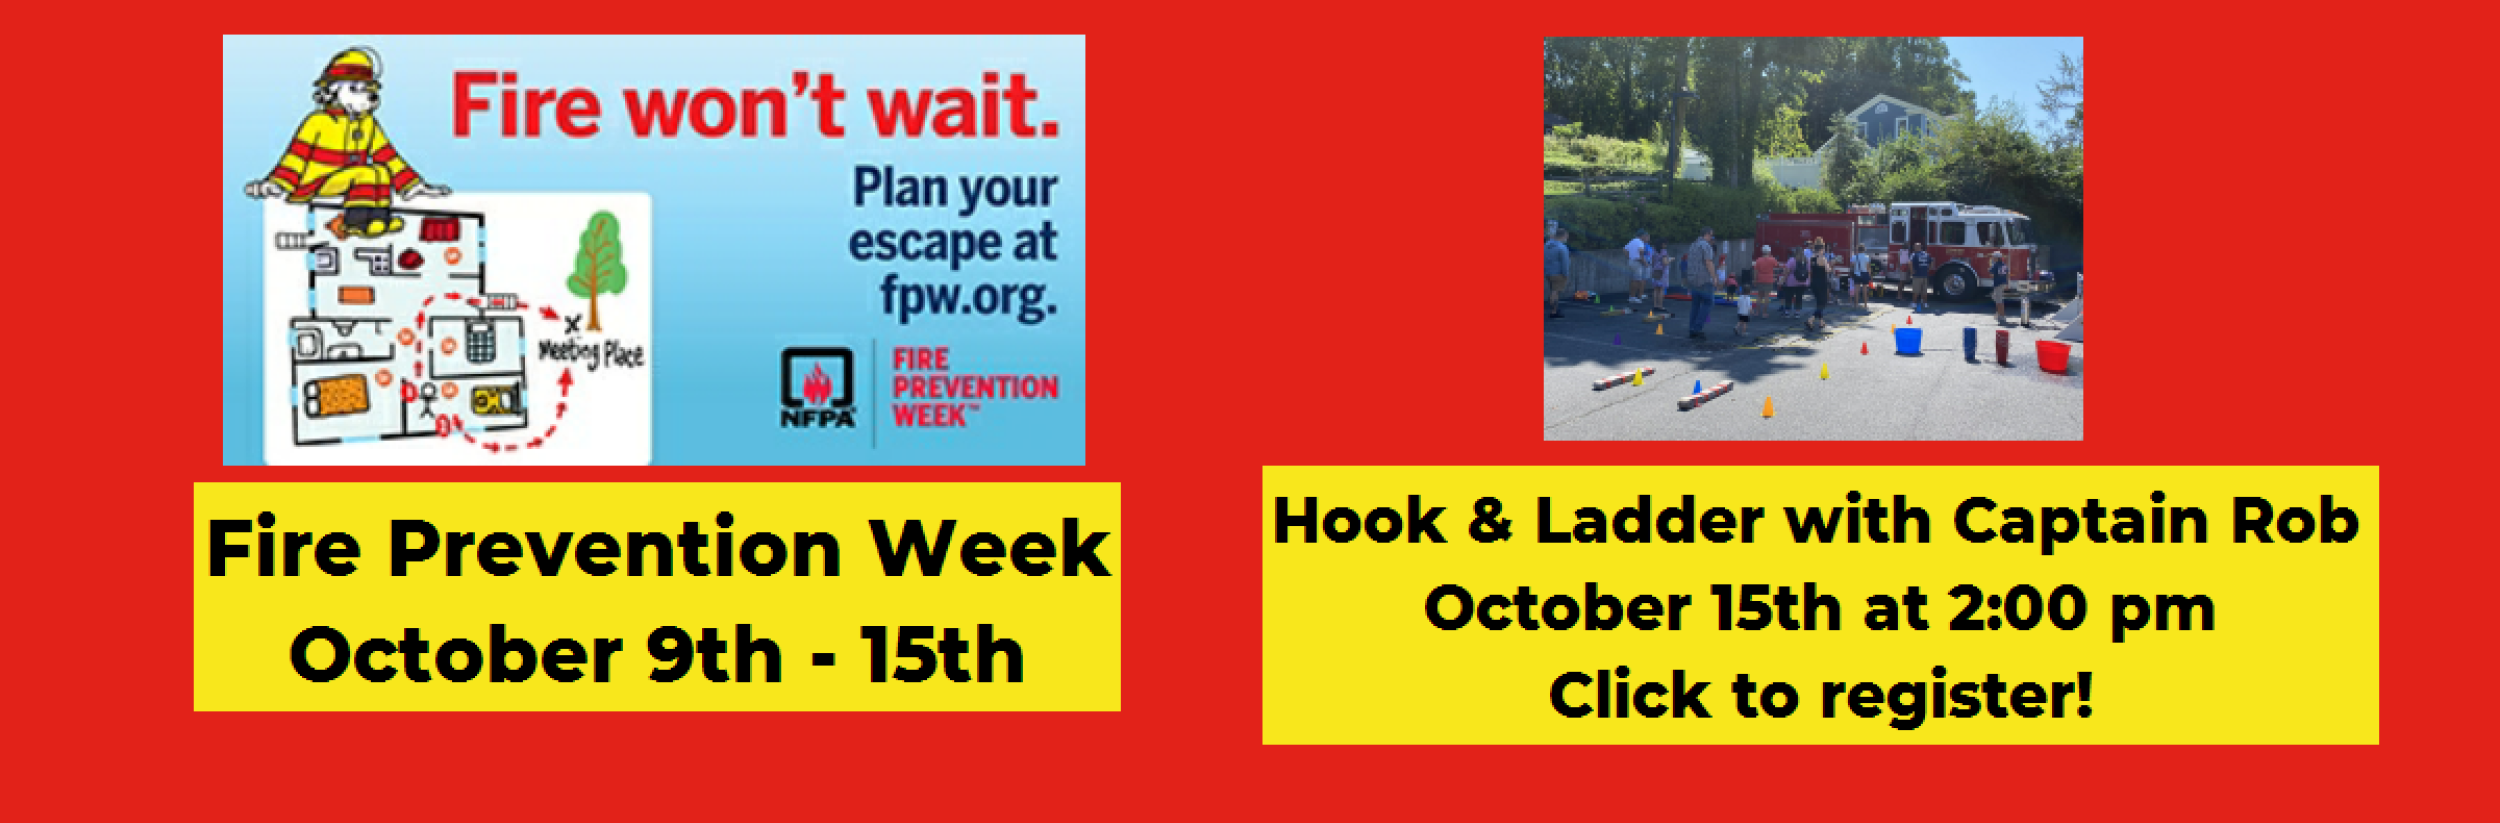 Image for "Fire Prevention Week 2022"